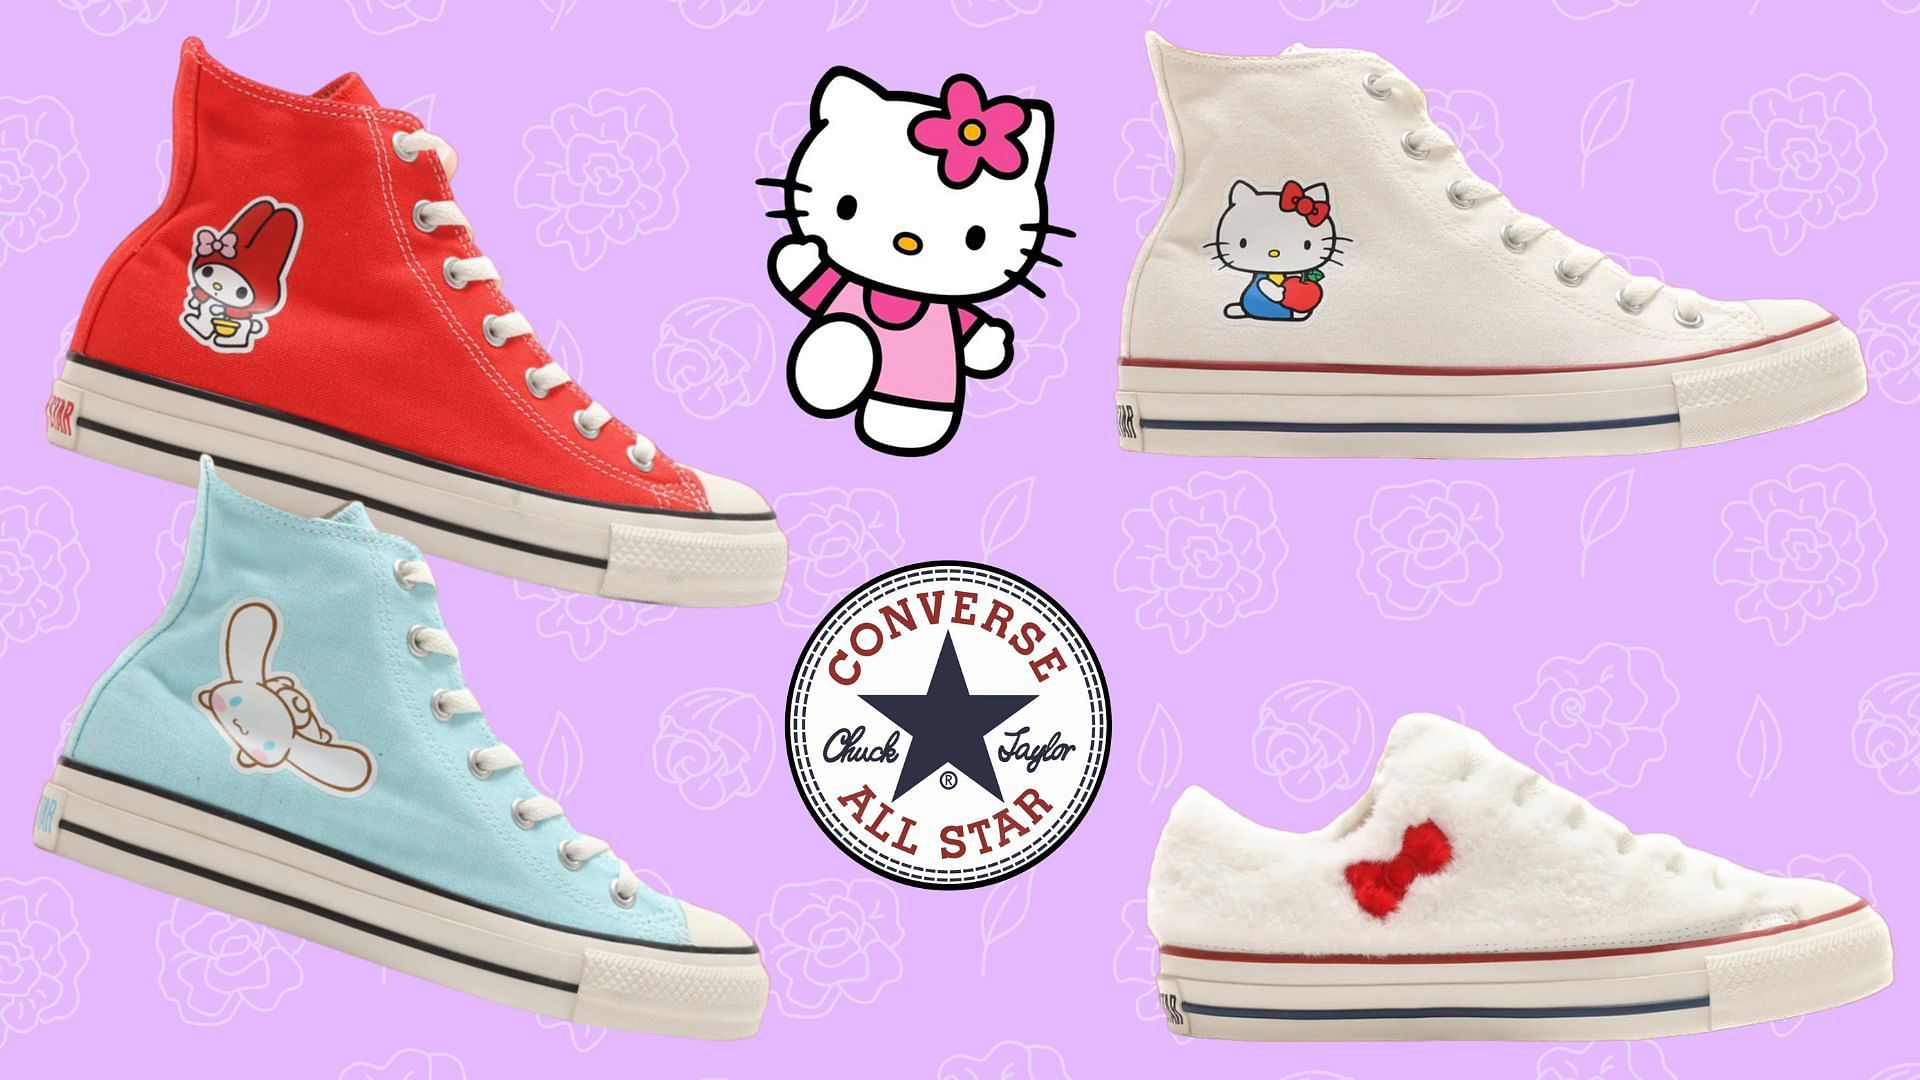 vitamin omvendt skrædder Hello Kitty: Hello Kitty x Converse Chuck Taylor All-Star sneaker pack:  Where to get, release date, price, and more details explored